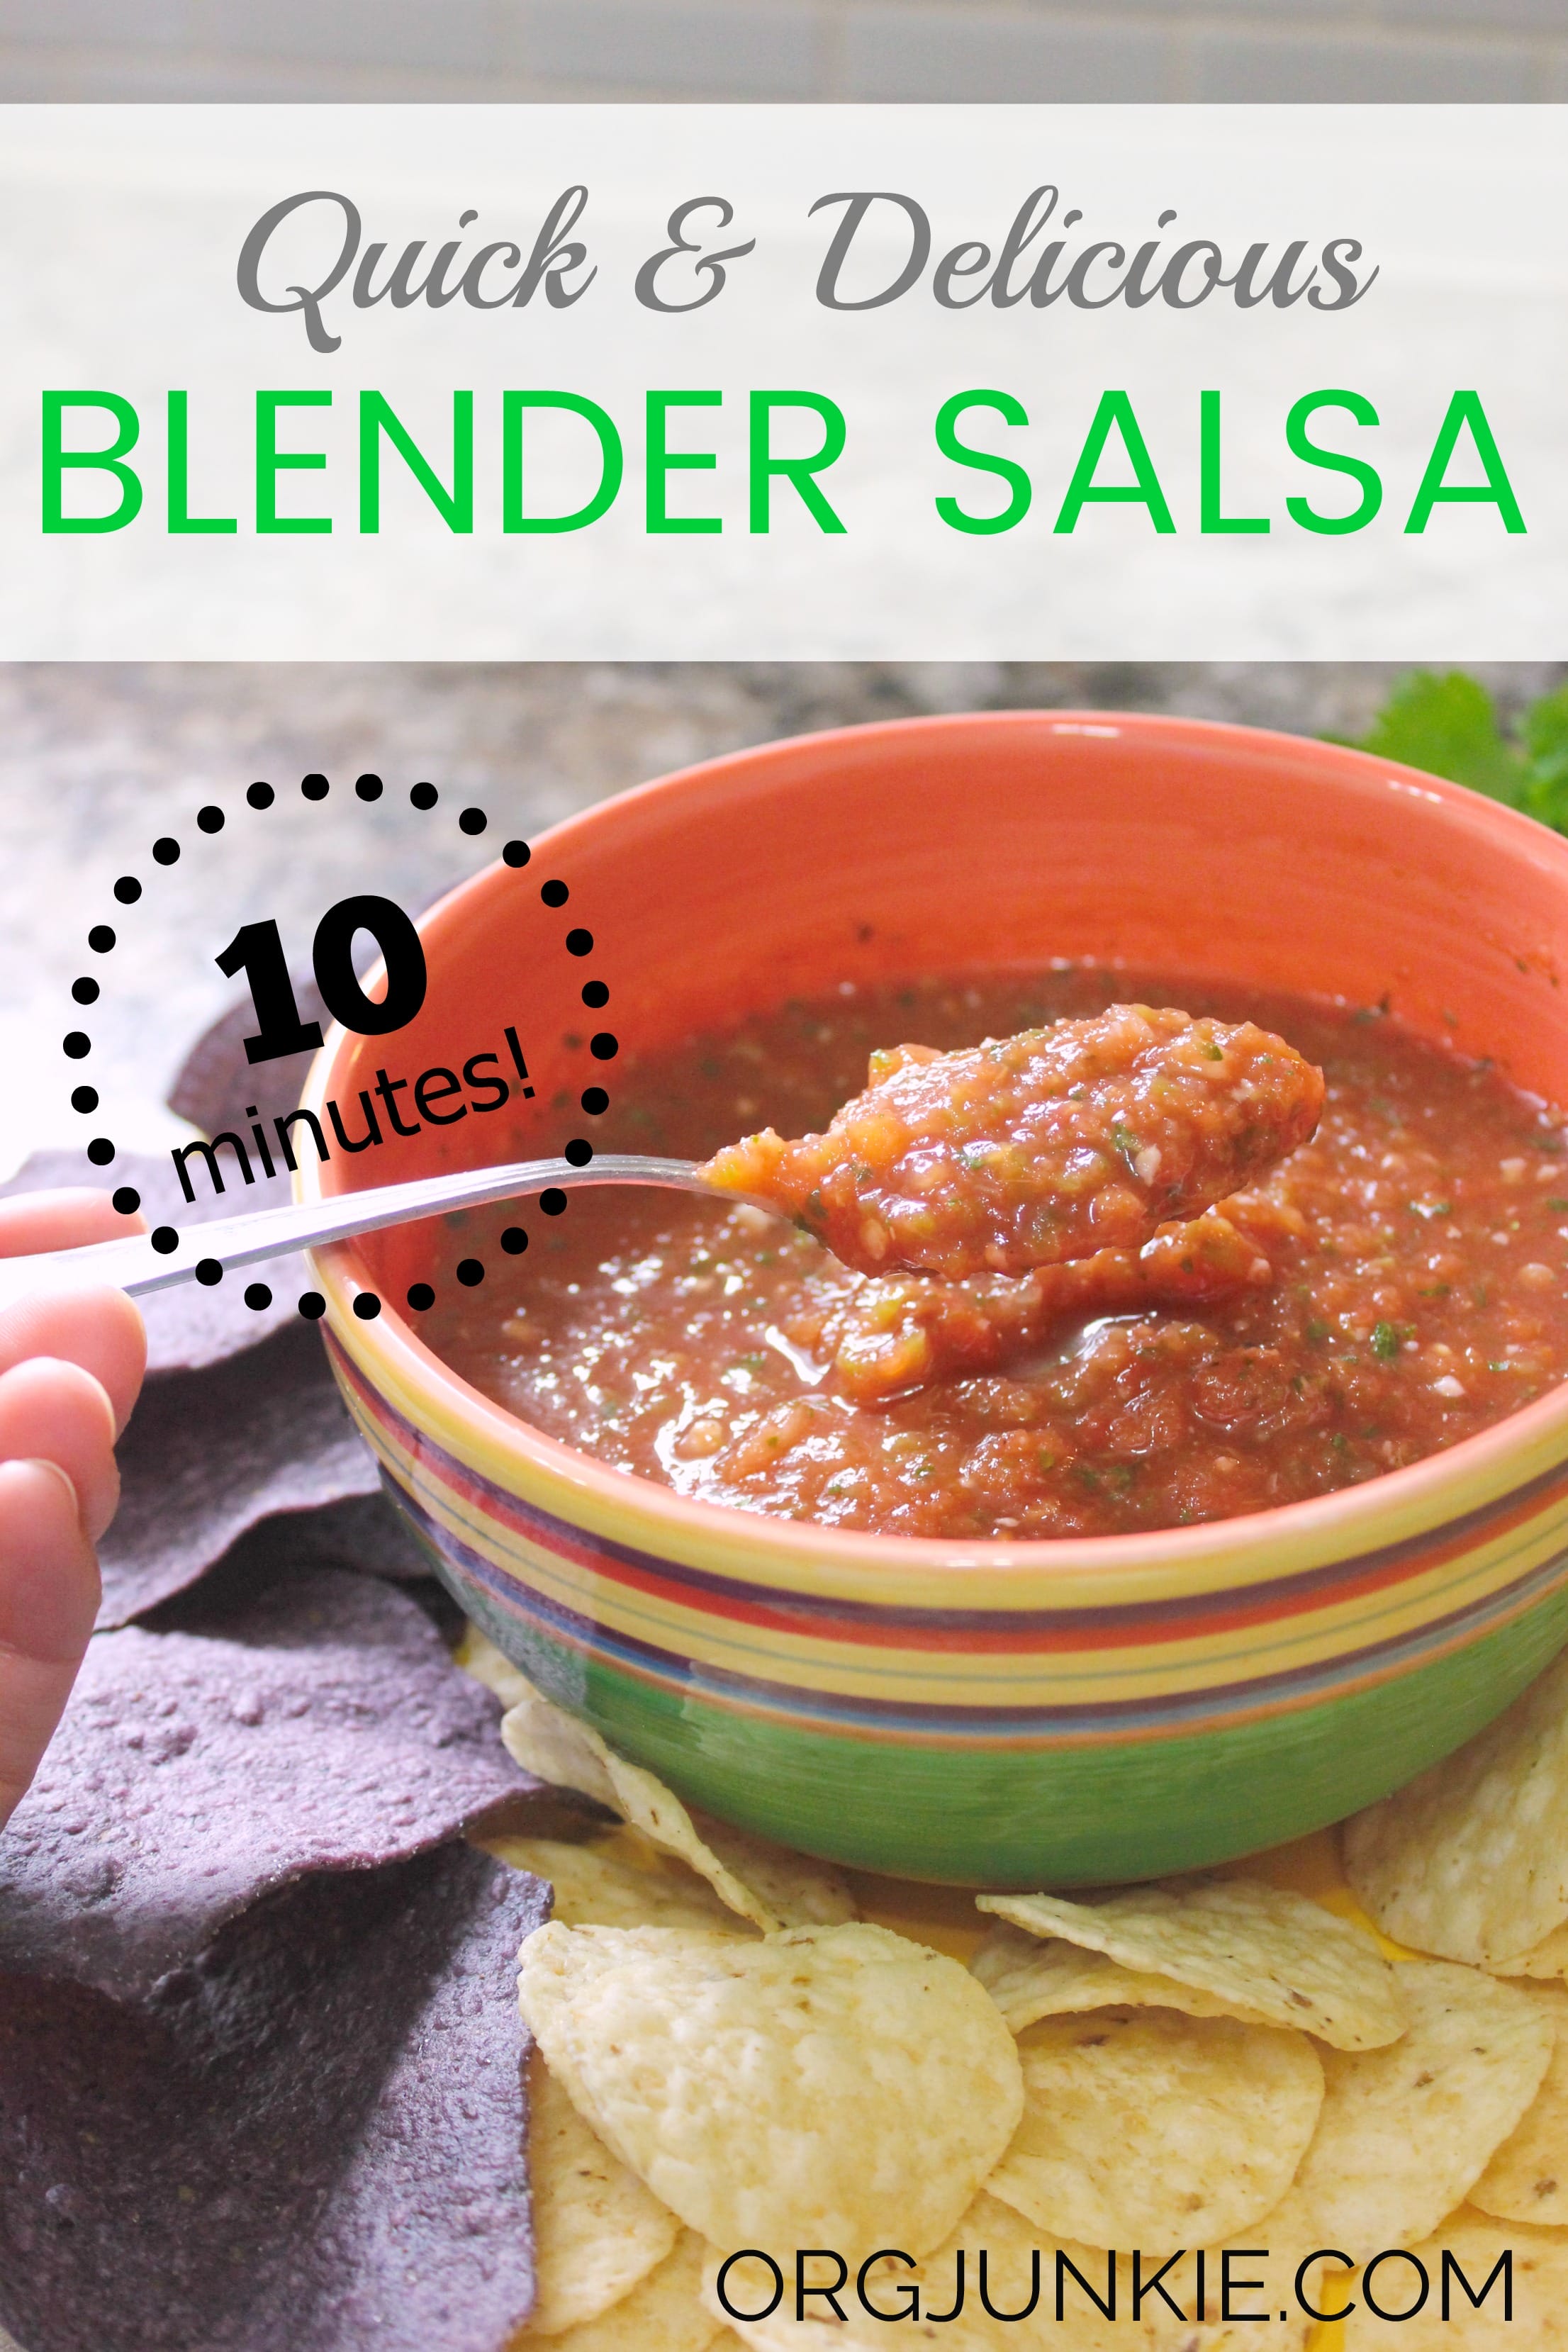 Quick and Delicious Blender Salsa at I'm an Organizing Junkie blog